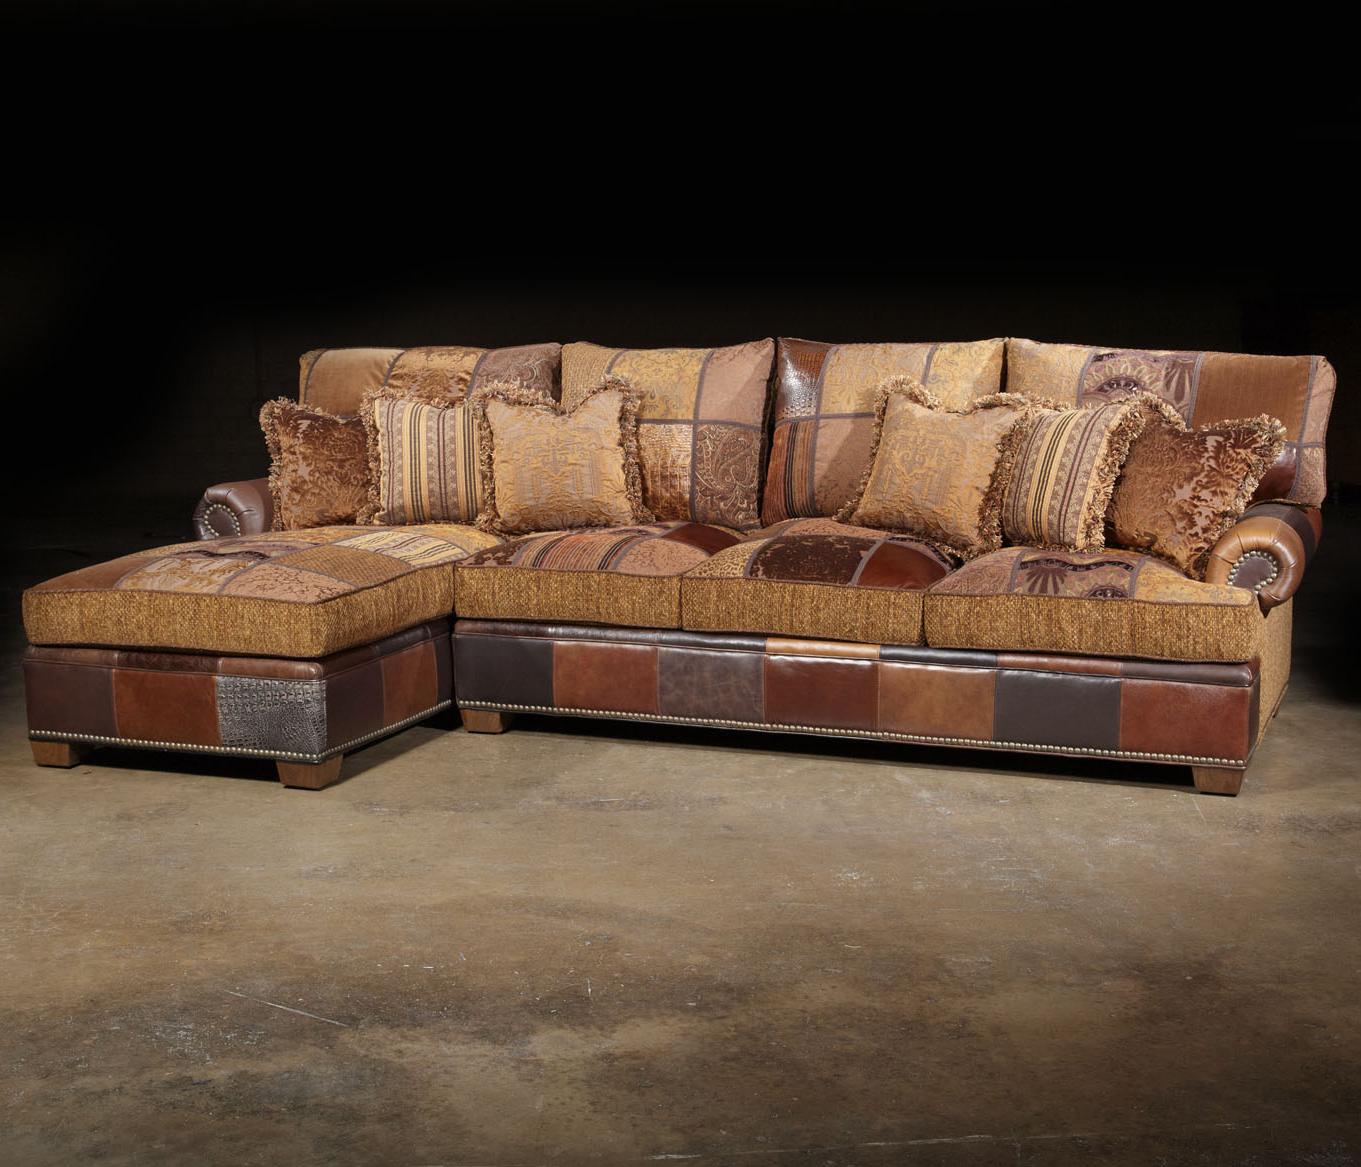 Patched Western Sectional Sofa in Traditional Furniture Style